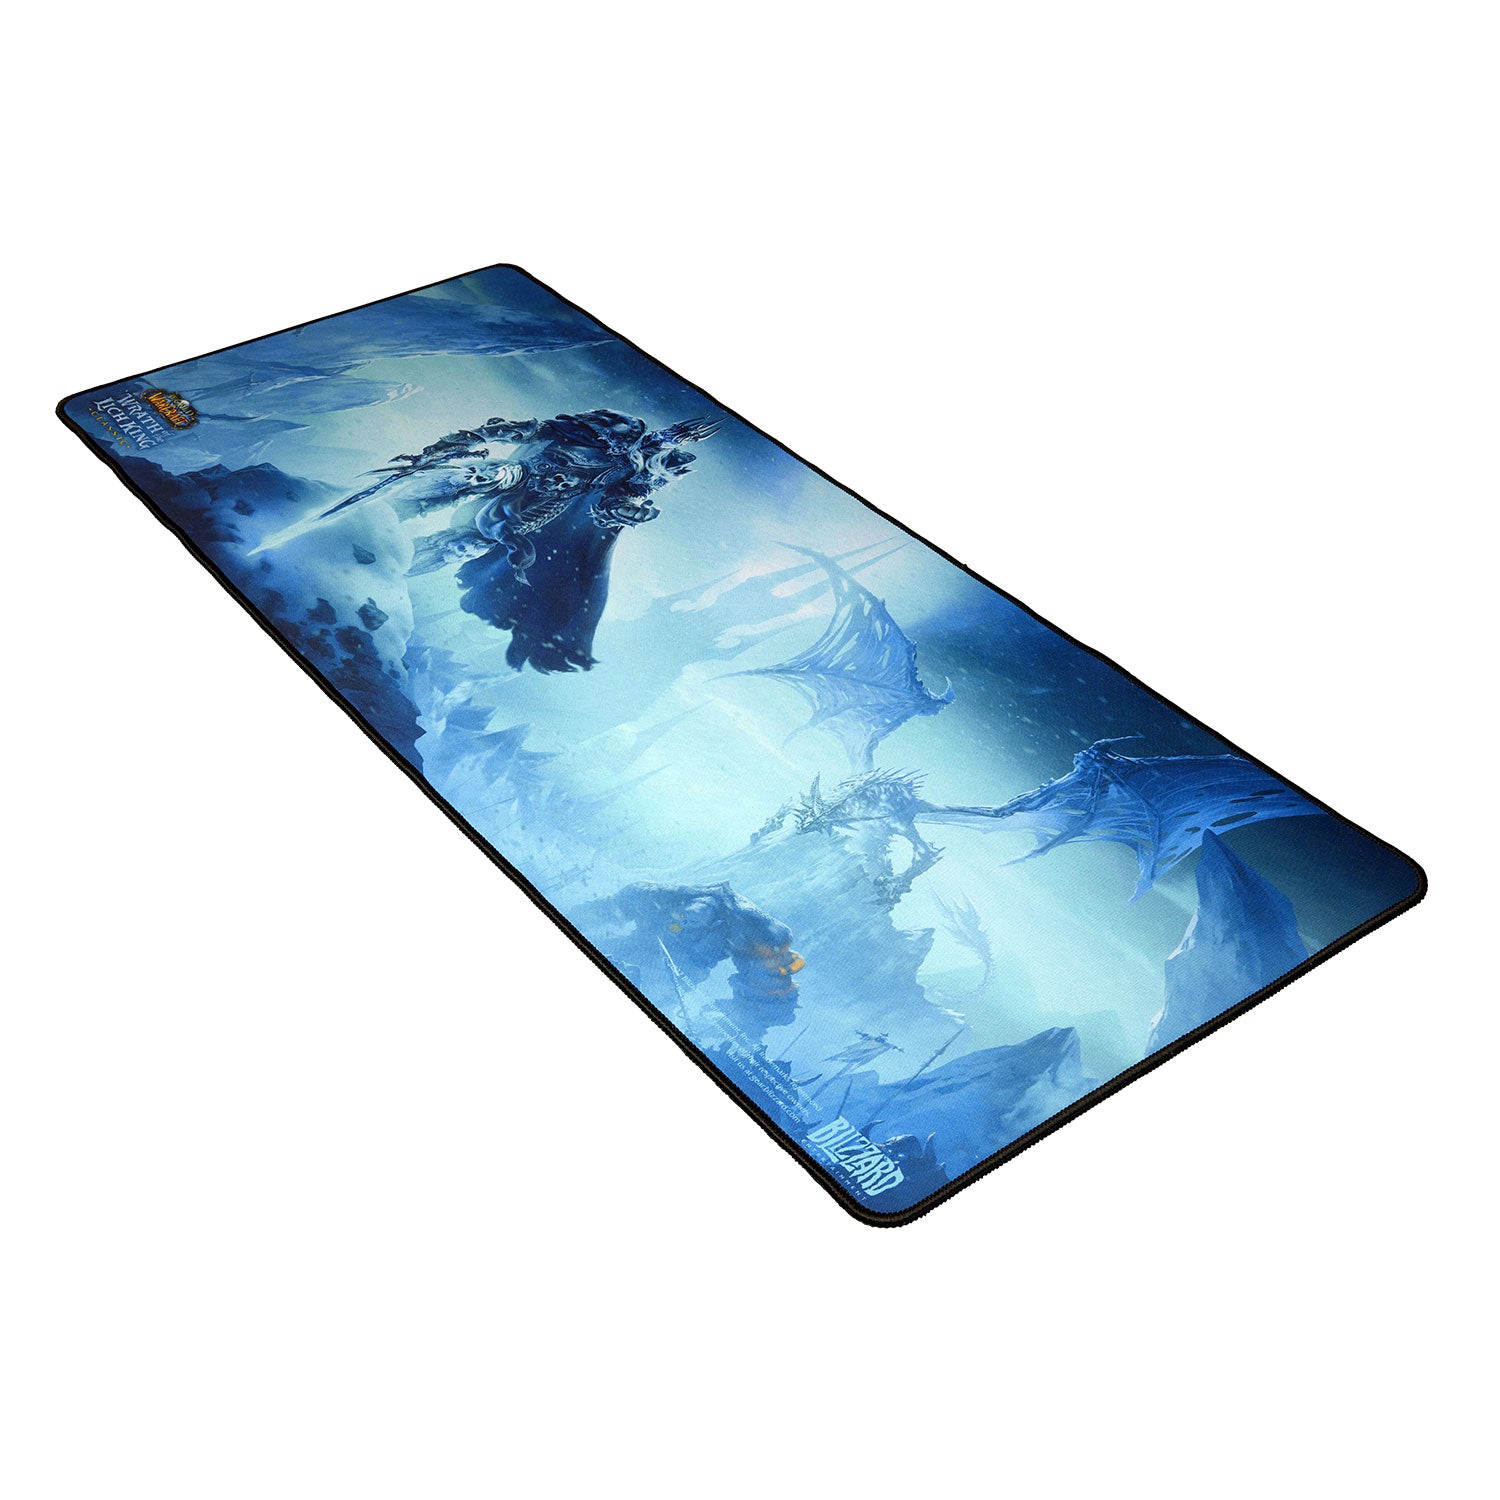 World of Warcraft Classic Wrath of the Lich King Gaming Desk Mat - Left View